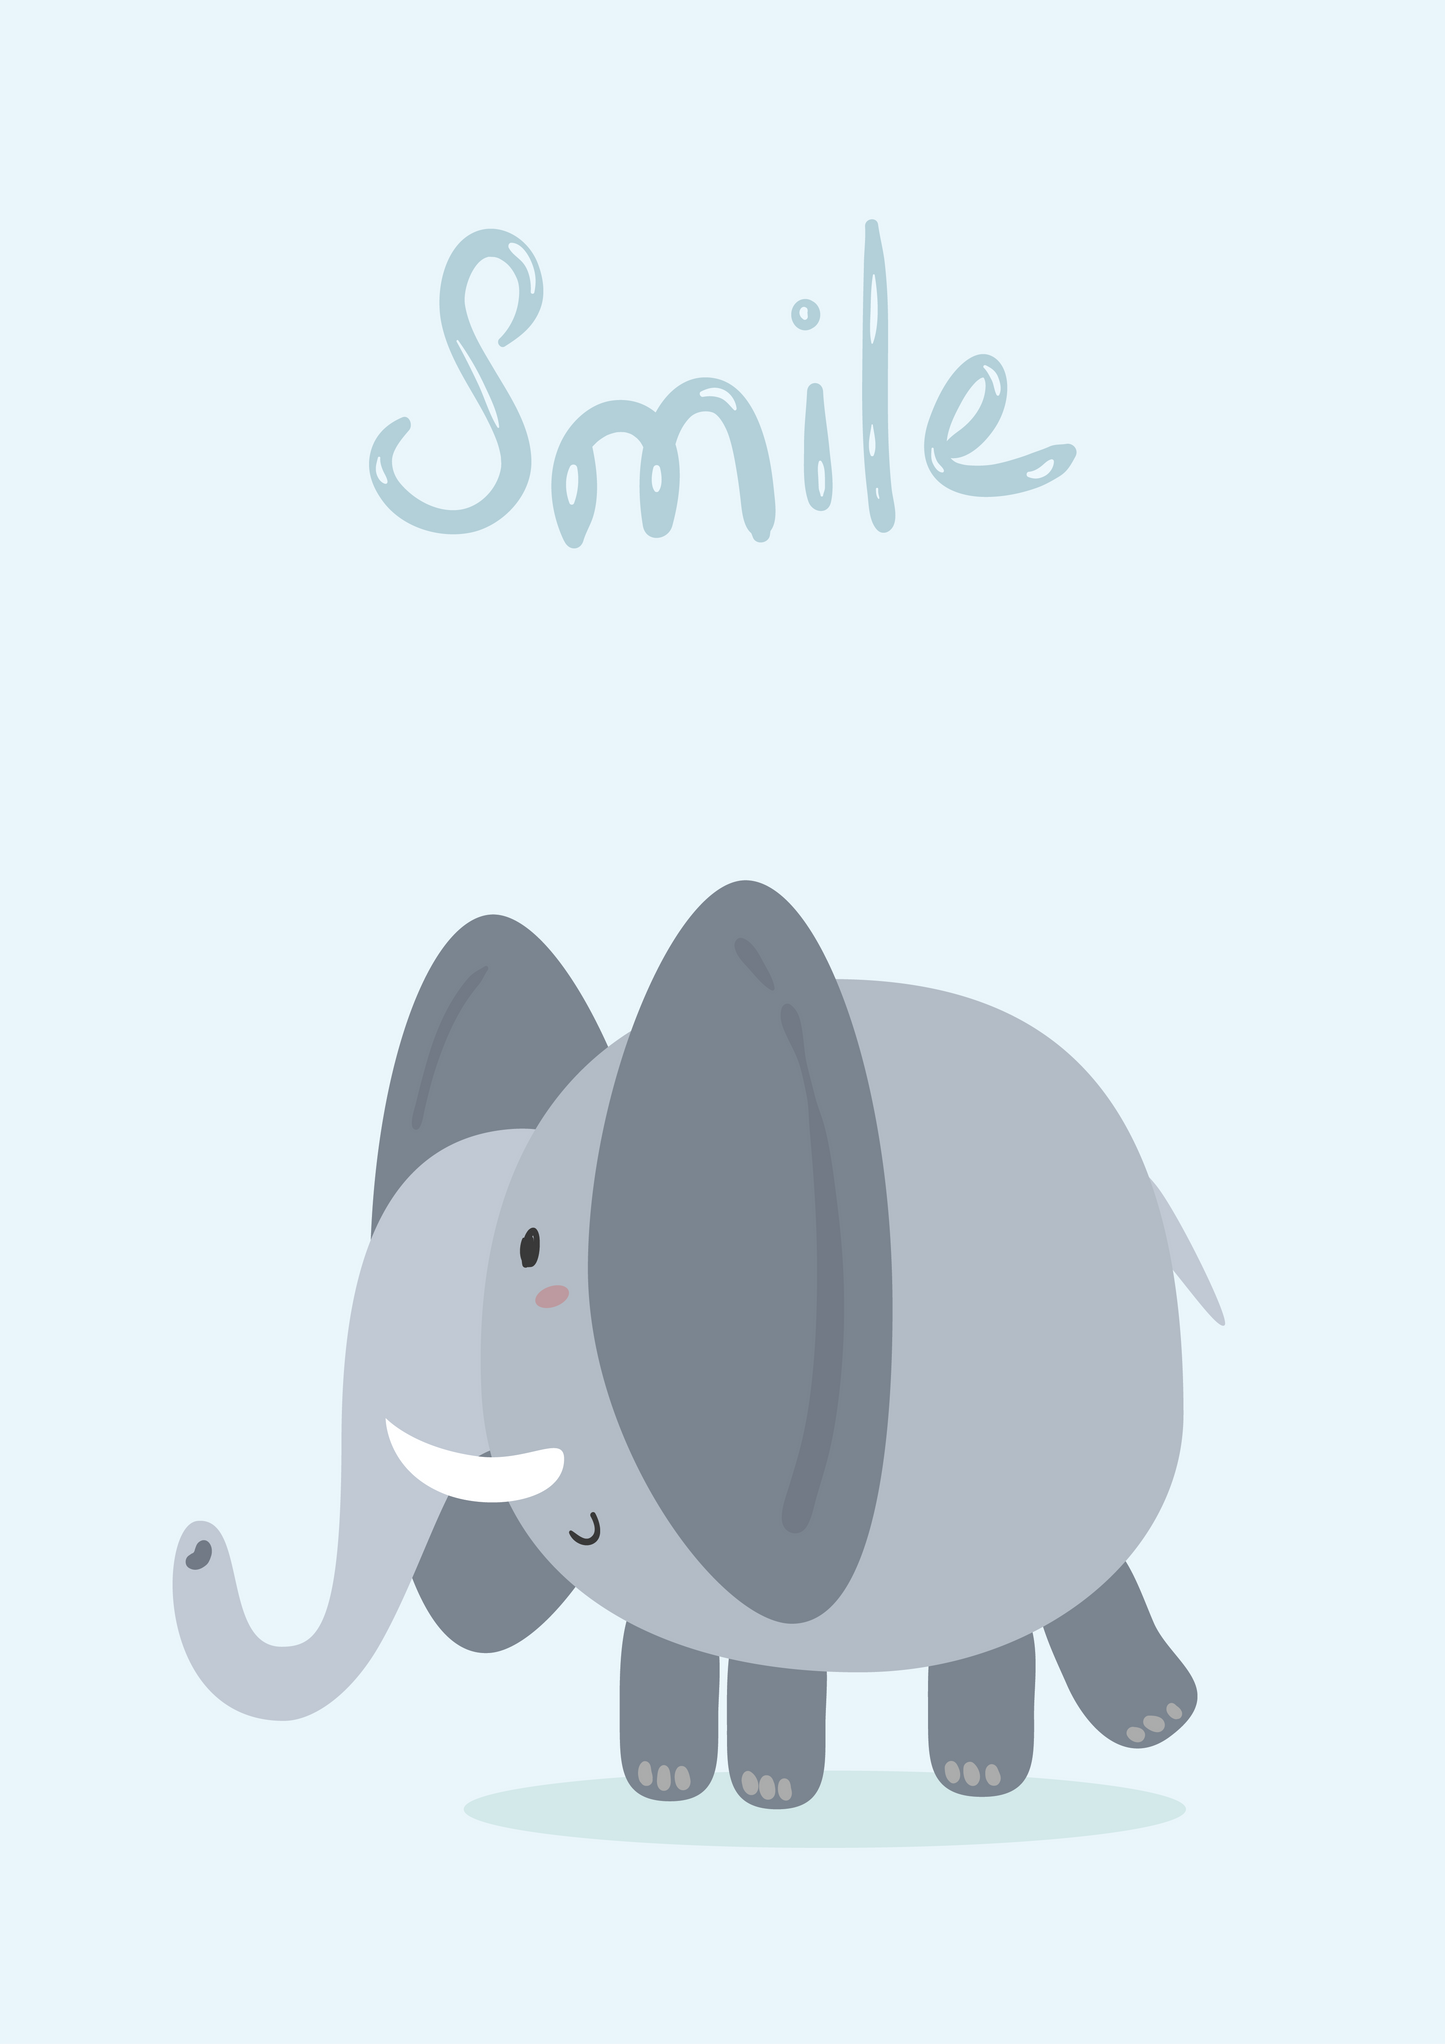 Smile with Cute Elephant